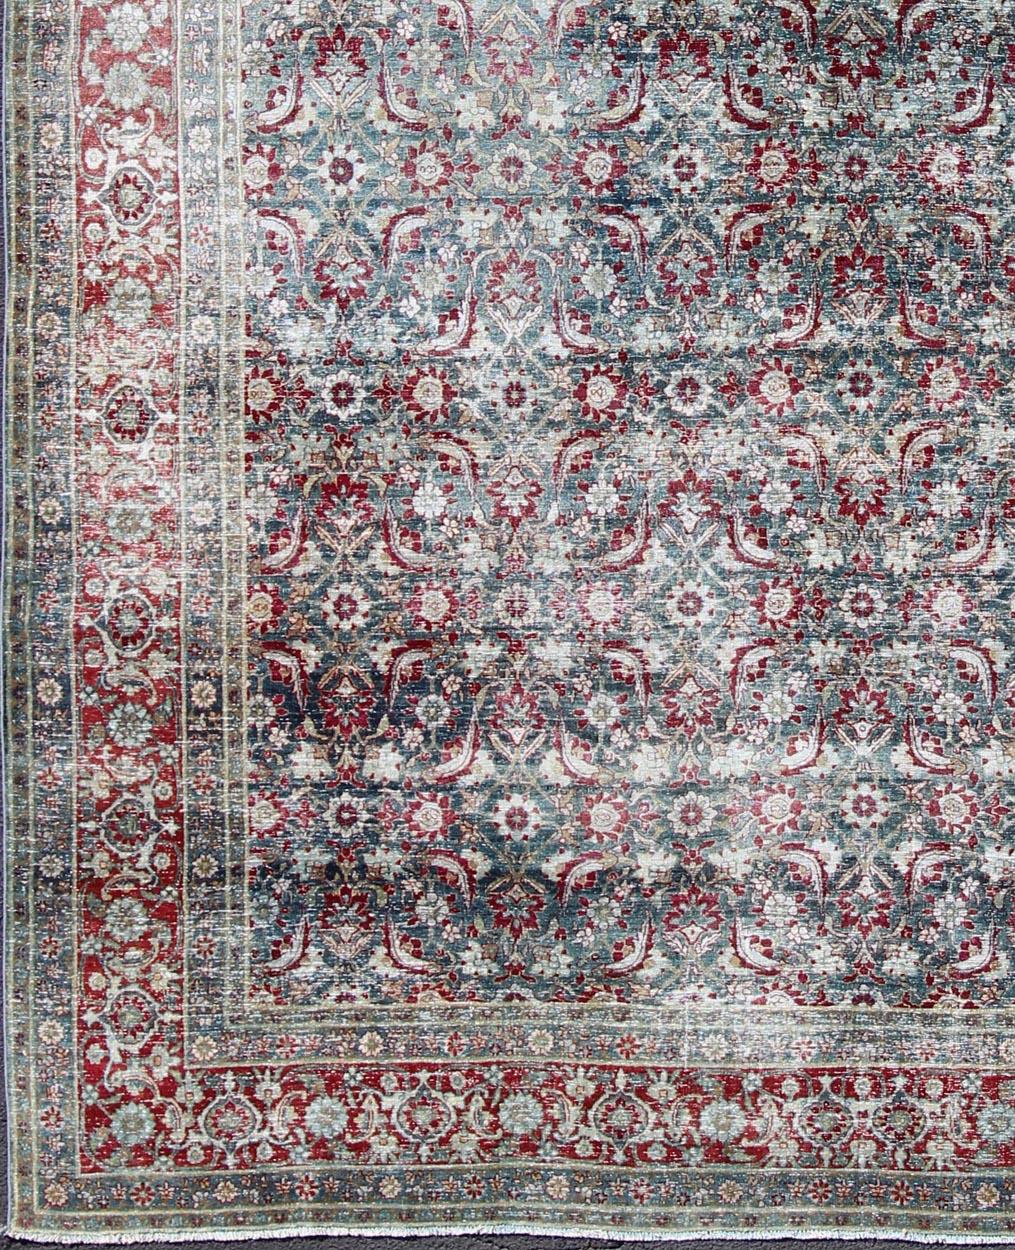 Persian antique Yazd carpet in blue and red tones with diamond geometric floral design, rug ema-7575, country of origin / type: Iran / Tabriz, circa 1910

This antique Persian Yazd carpet (circa 1910) features a refined palate of various shades of